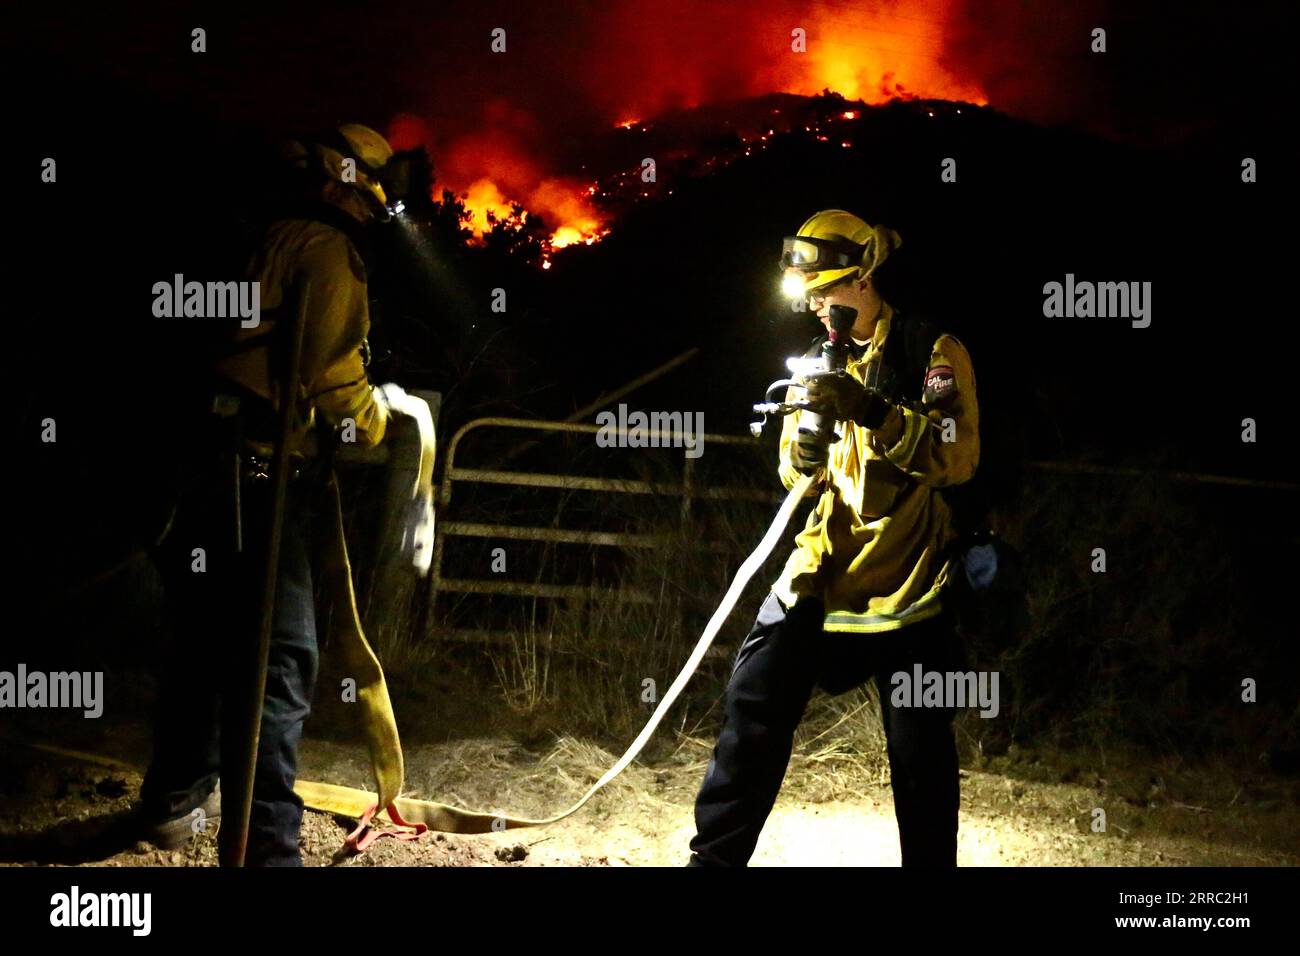 211014 -- SANTA BARBARA COUNTY, Oct. 14, 2021 -- Firefighters work to contain the Alisal Fire in Santa Barbara County, California, the United States, Oct. 13, 2021. A fast growing wildfire in Southern California swelled to over 16,000 acres 64.7 square km as of Thursday morning with more evacuations ordered. The Alisal Fire is now 16,801 acres with only 5 percent containment, said the Santa Barbara County Fire Department in its latest update. U.S.-SANTA BARBARA COUNTY-WILDFIRE GaoxShan PUBLICATIONxNOTxINxCHN Stock Photo